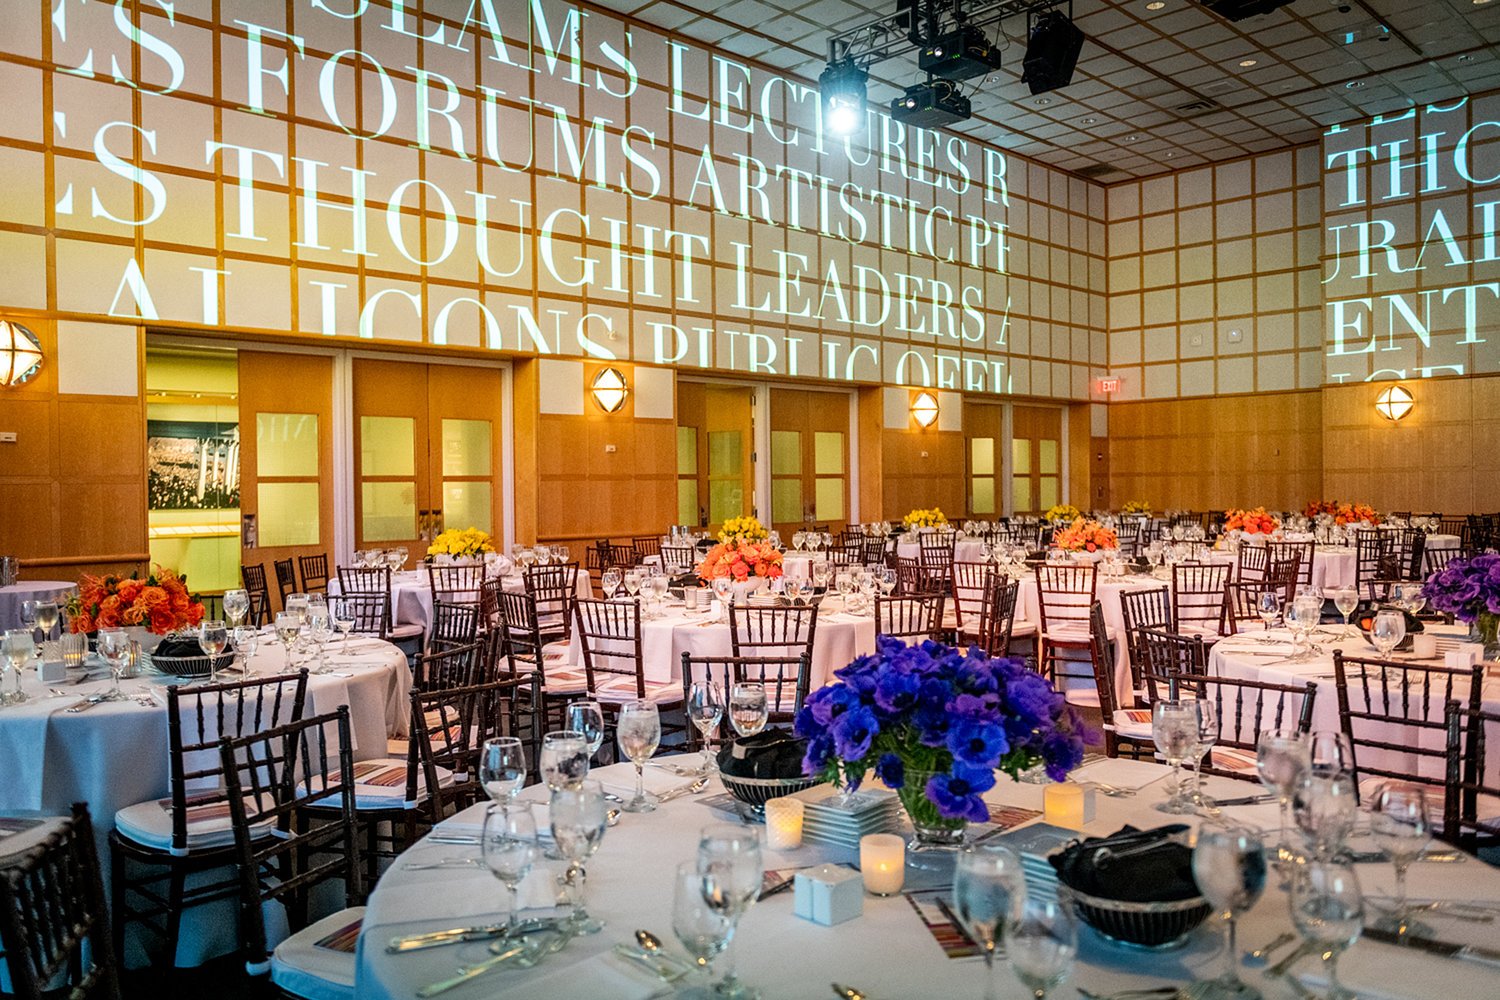 00_Non+Profit+WBUR+Gala+Projection+Mapping_AE+Events.jpg